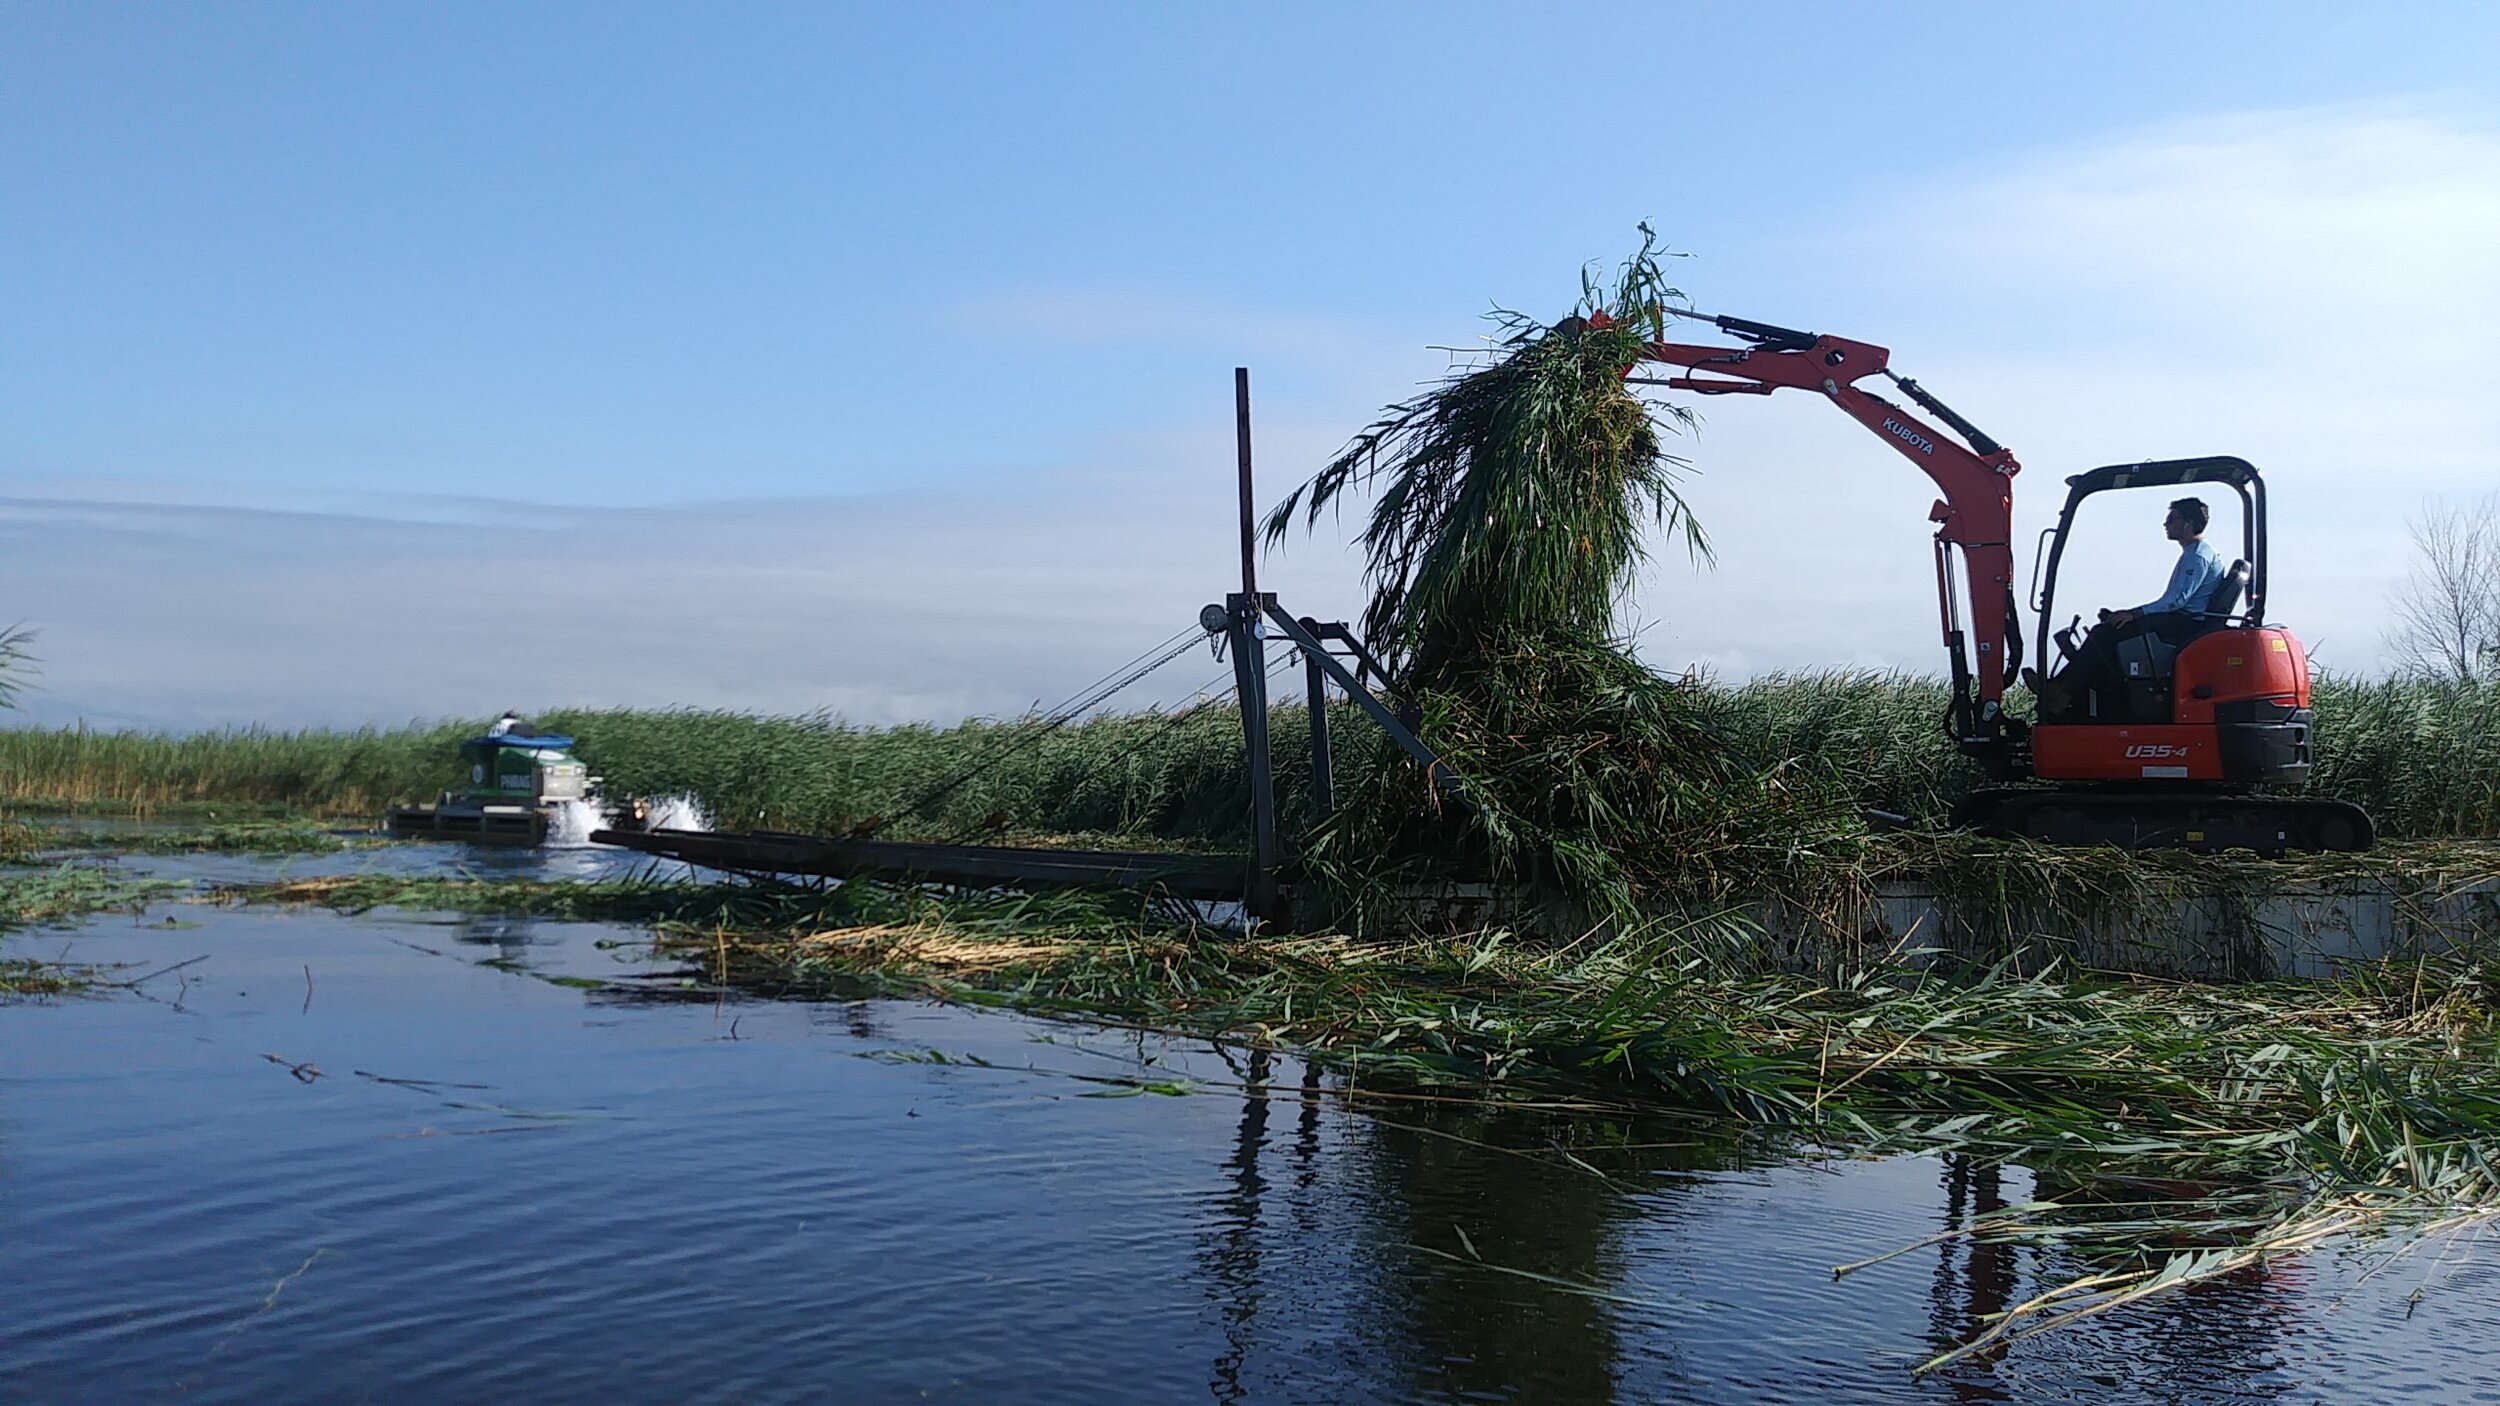 An excavator helping to load large amounts of Phragmites onto a barge.